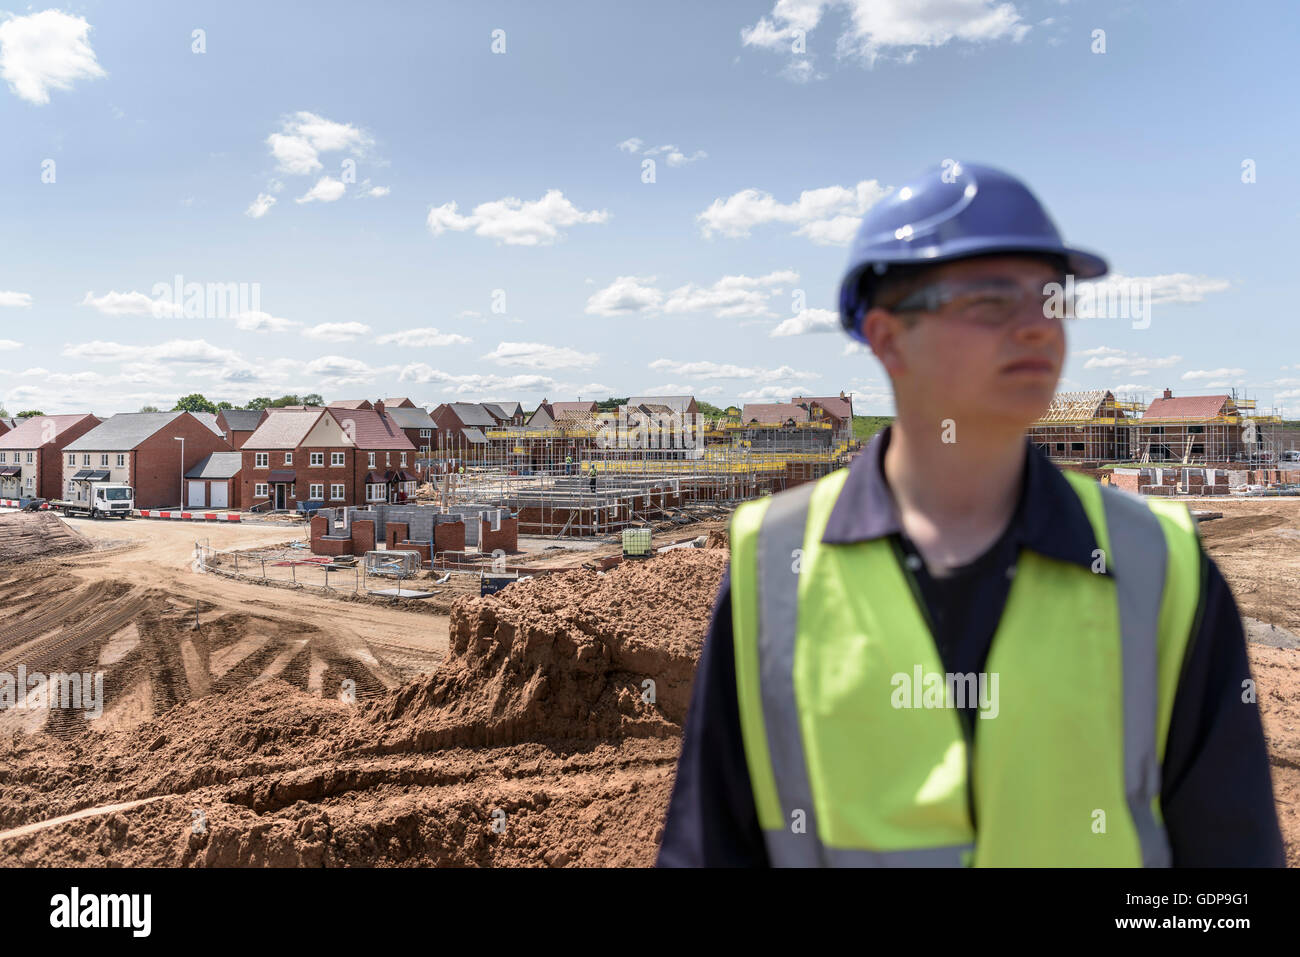 Builder on housing building site Stock Photo